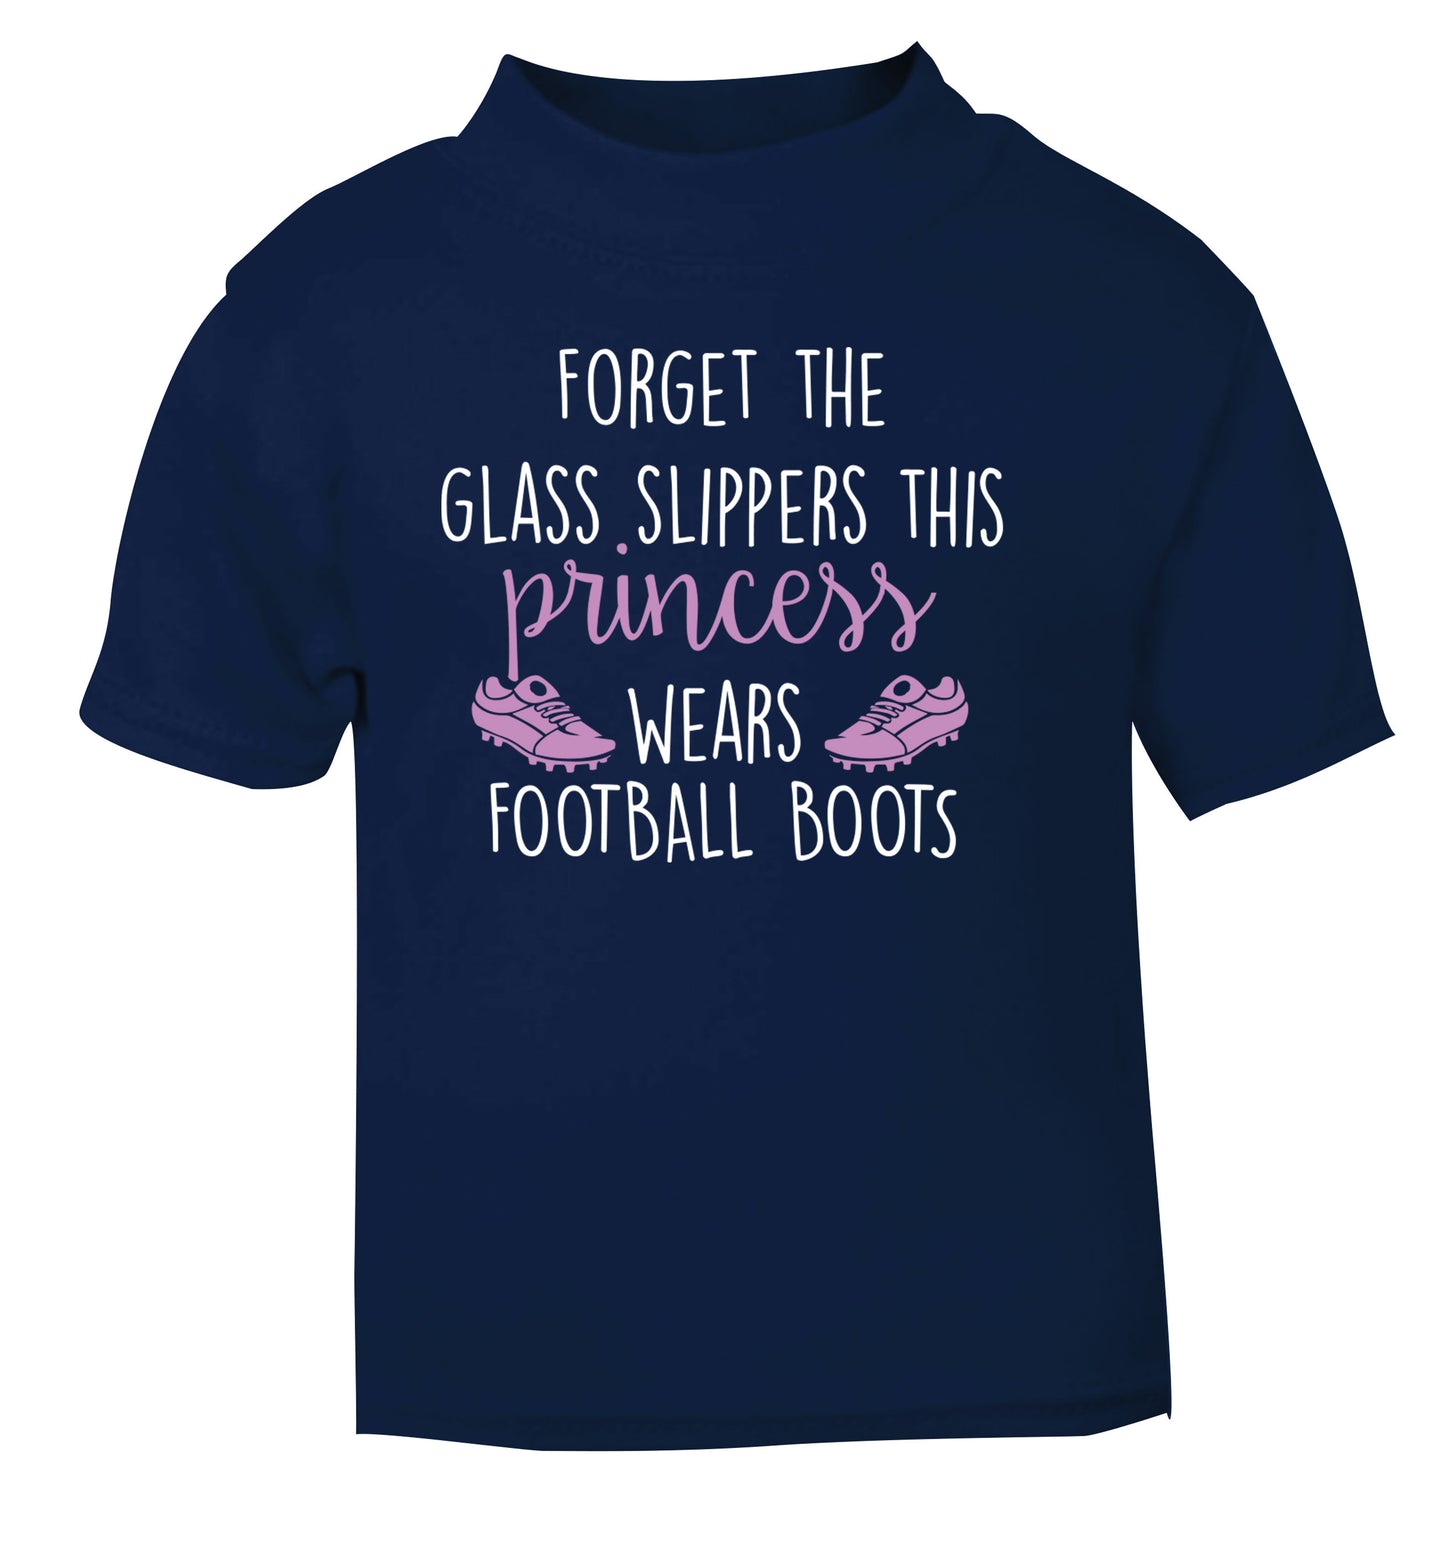 Forget the glass slippers this princess wears football boots navy Baby Toddler Tshirt 2 Years